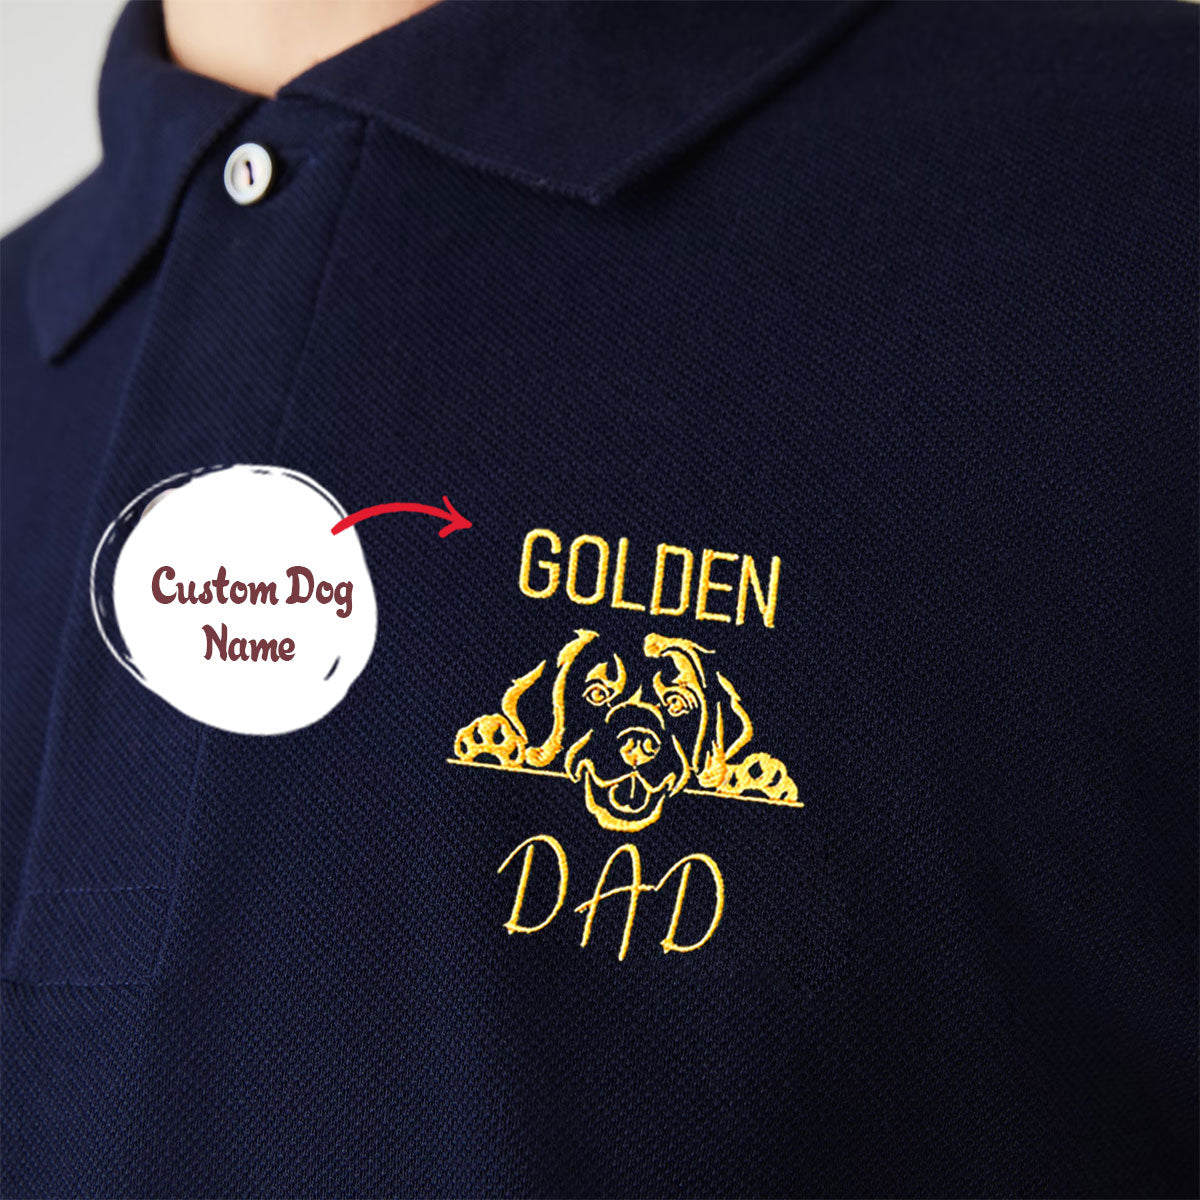 Custom Golden Retriever Dog Dad Embroidered Polo Shirt, Personalized Polo Shirt with Dog Name, Perfect Gifts for Golden Retriever Lovers